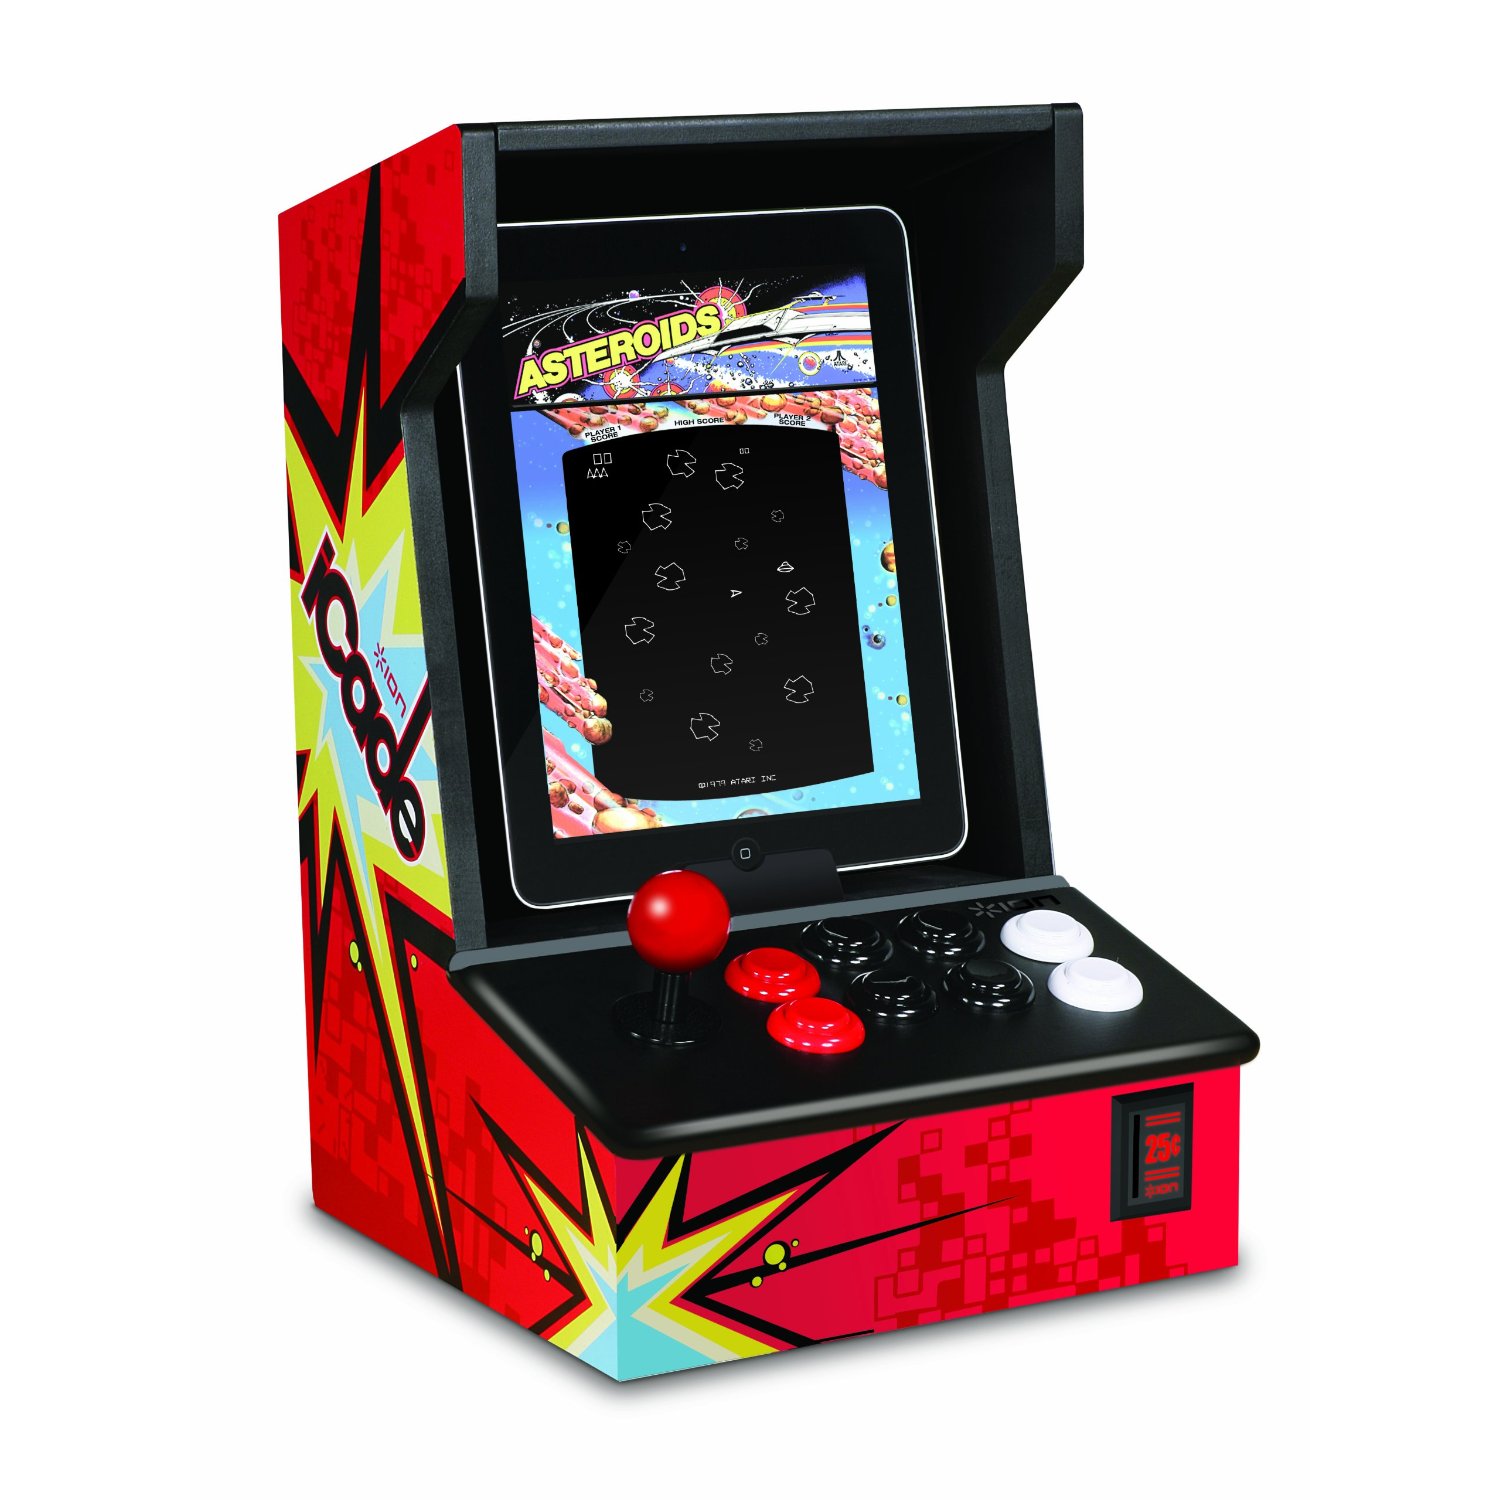 http://thetechjournal.com/wp-content/uploads/images/1201/1326110195-ion-icade-arcade-cabinet-for-ipad-1.jpg